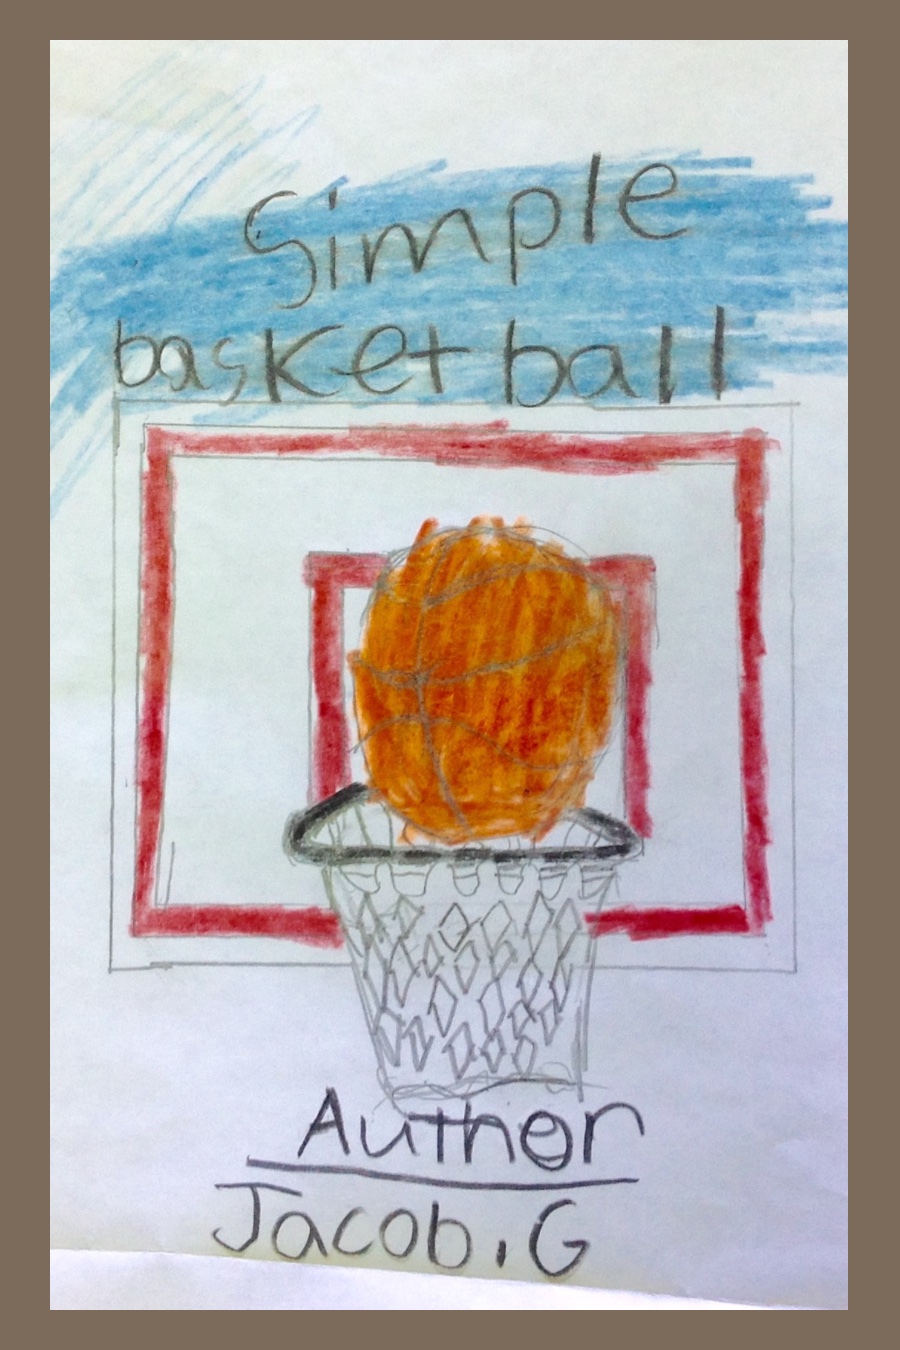 Simple Basketball by Jacob G